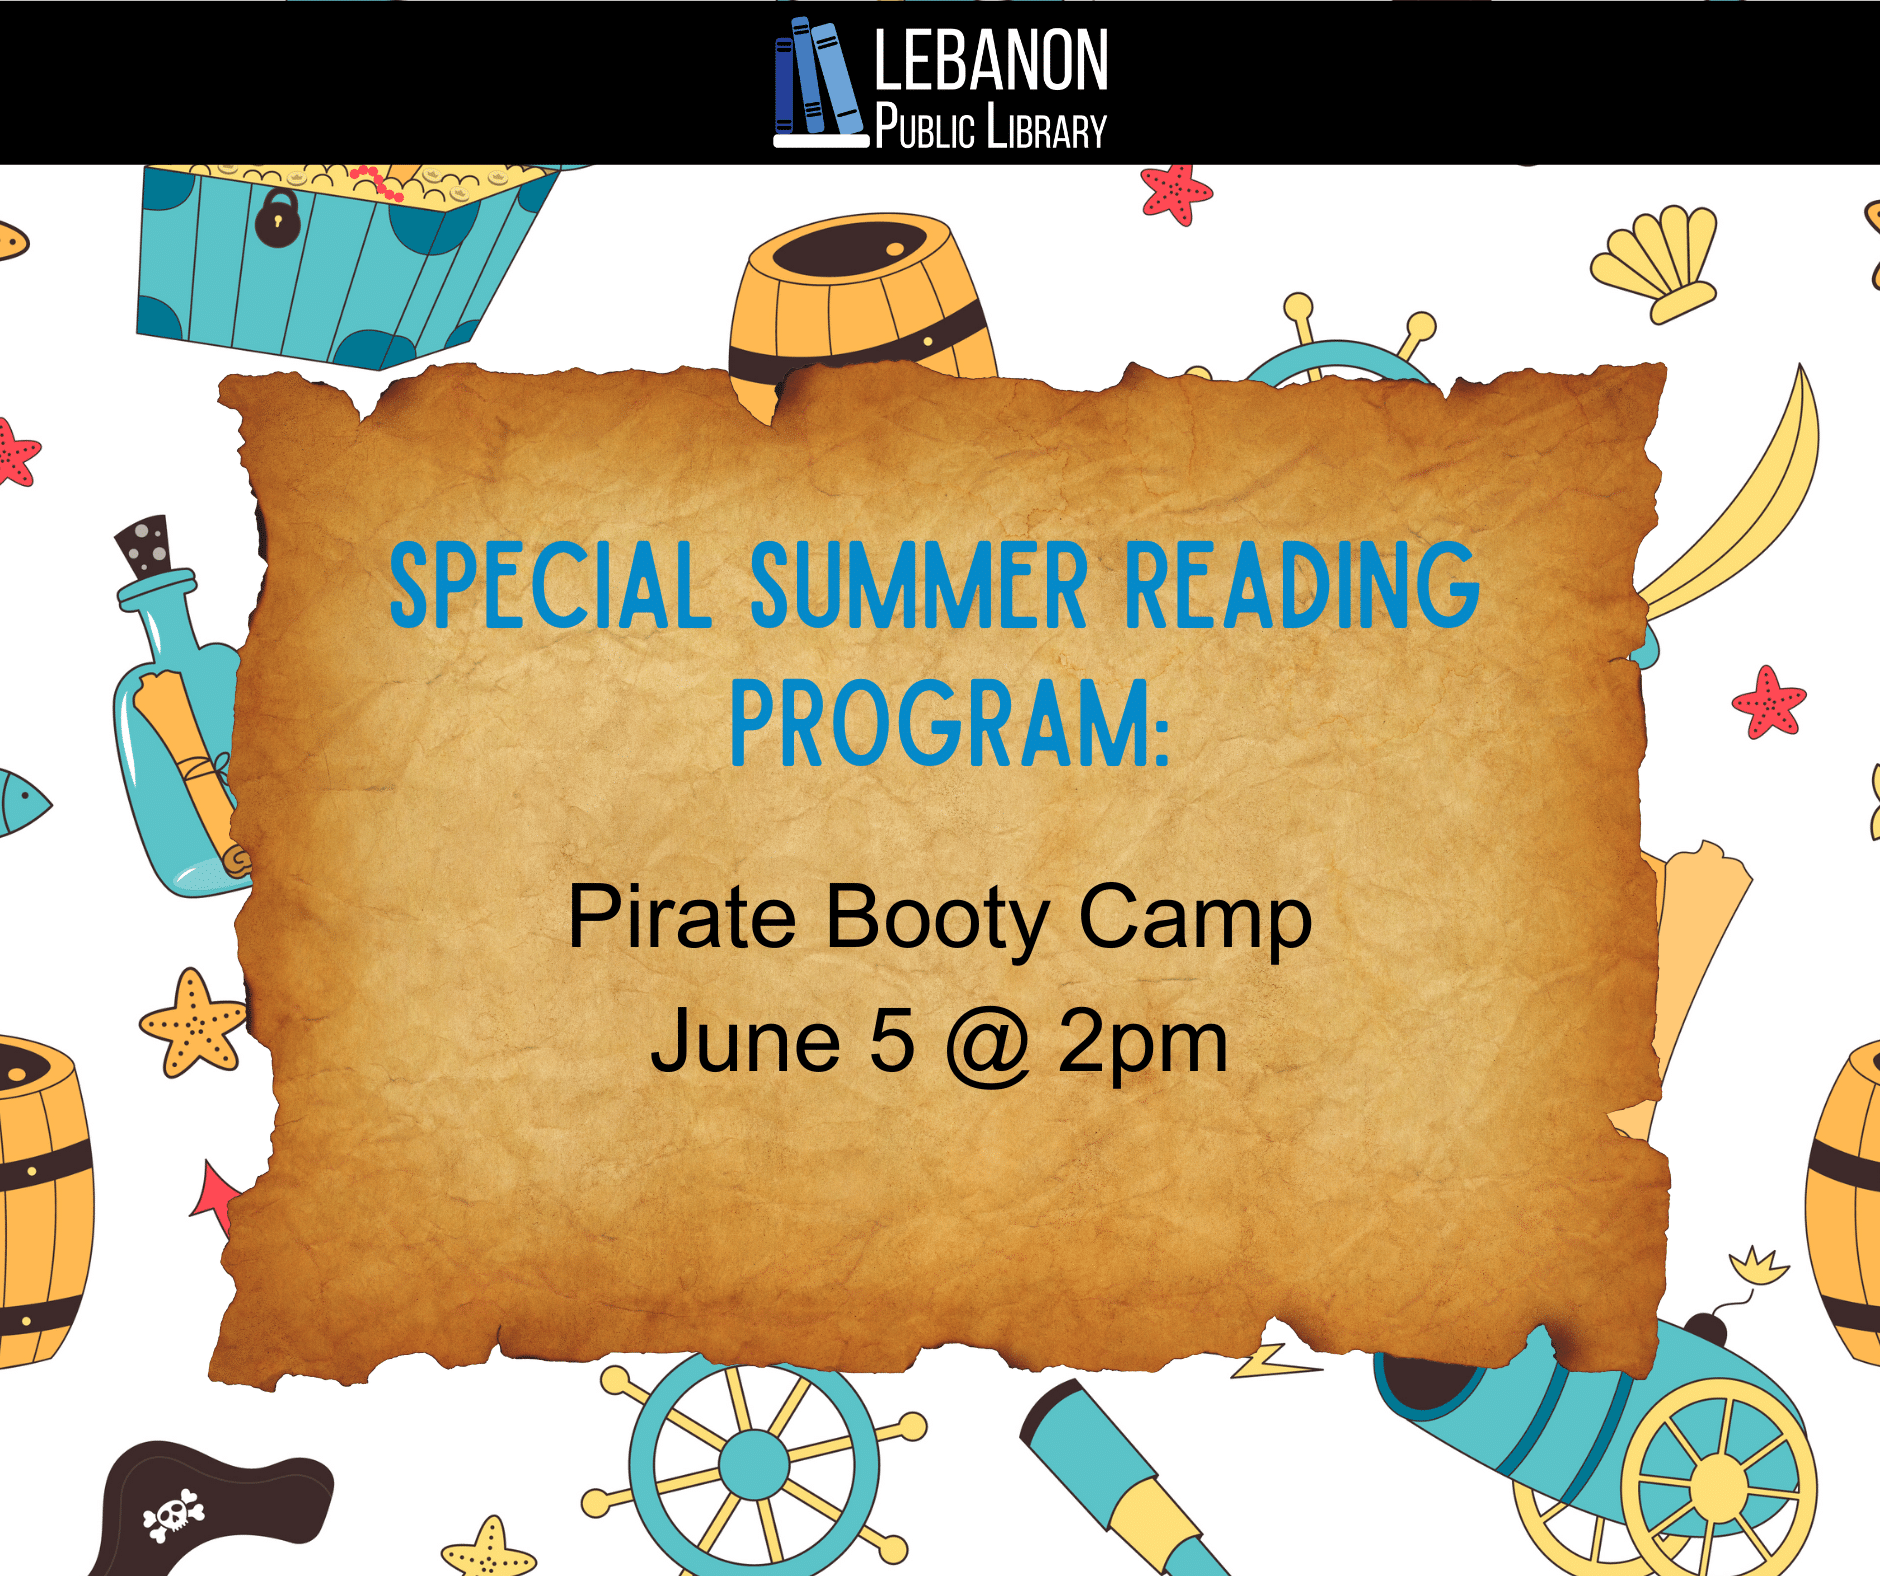 Special Summer Reading Program: Pirate Booty Camp, June 5th at 2pm.